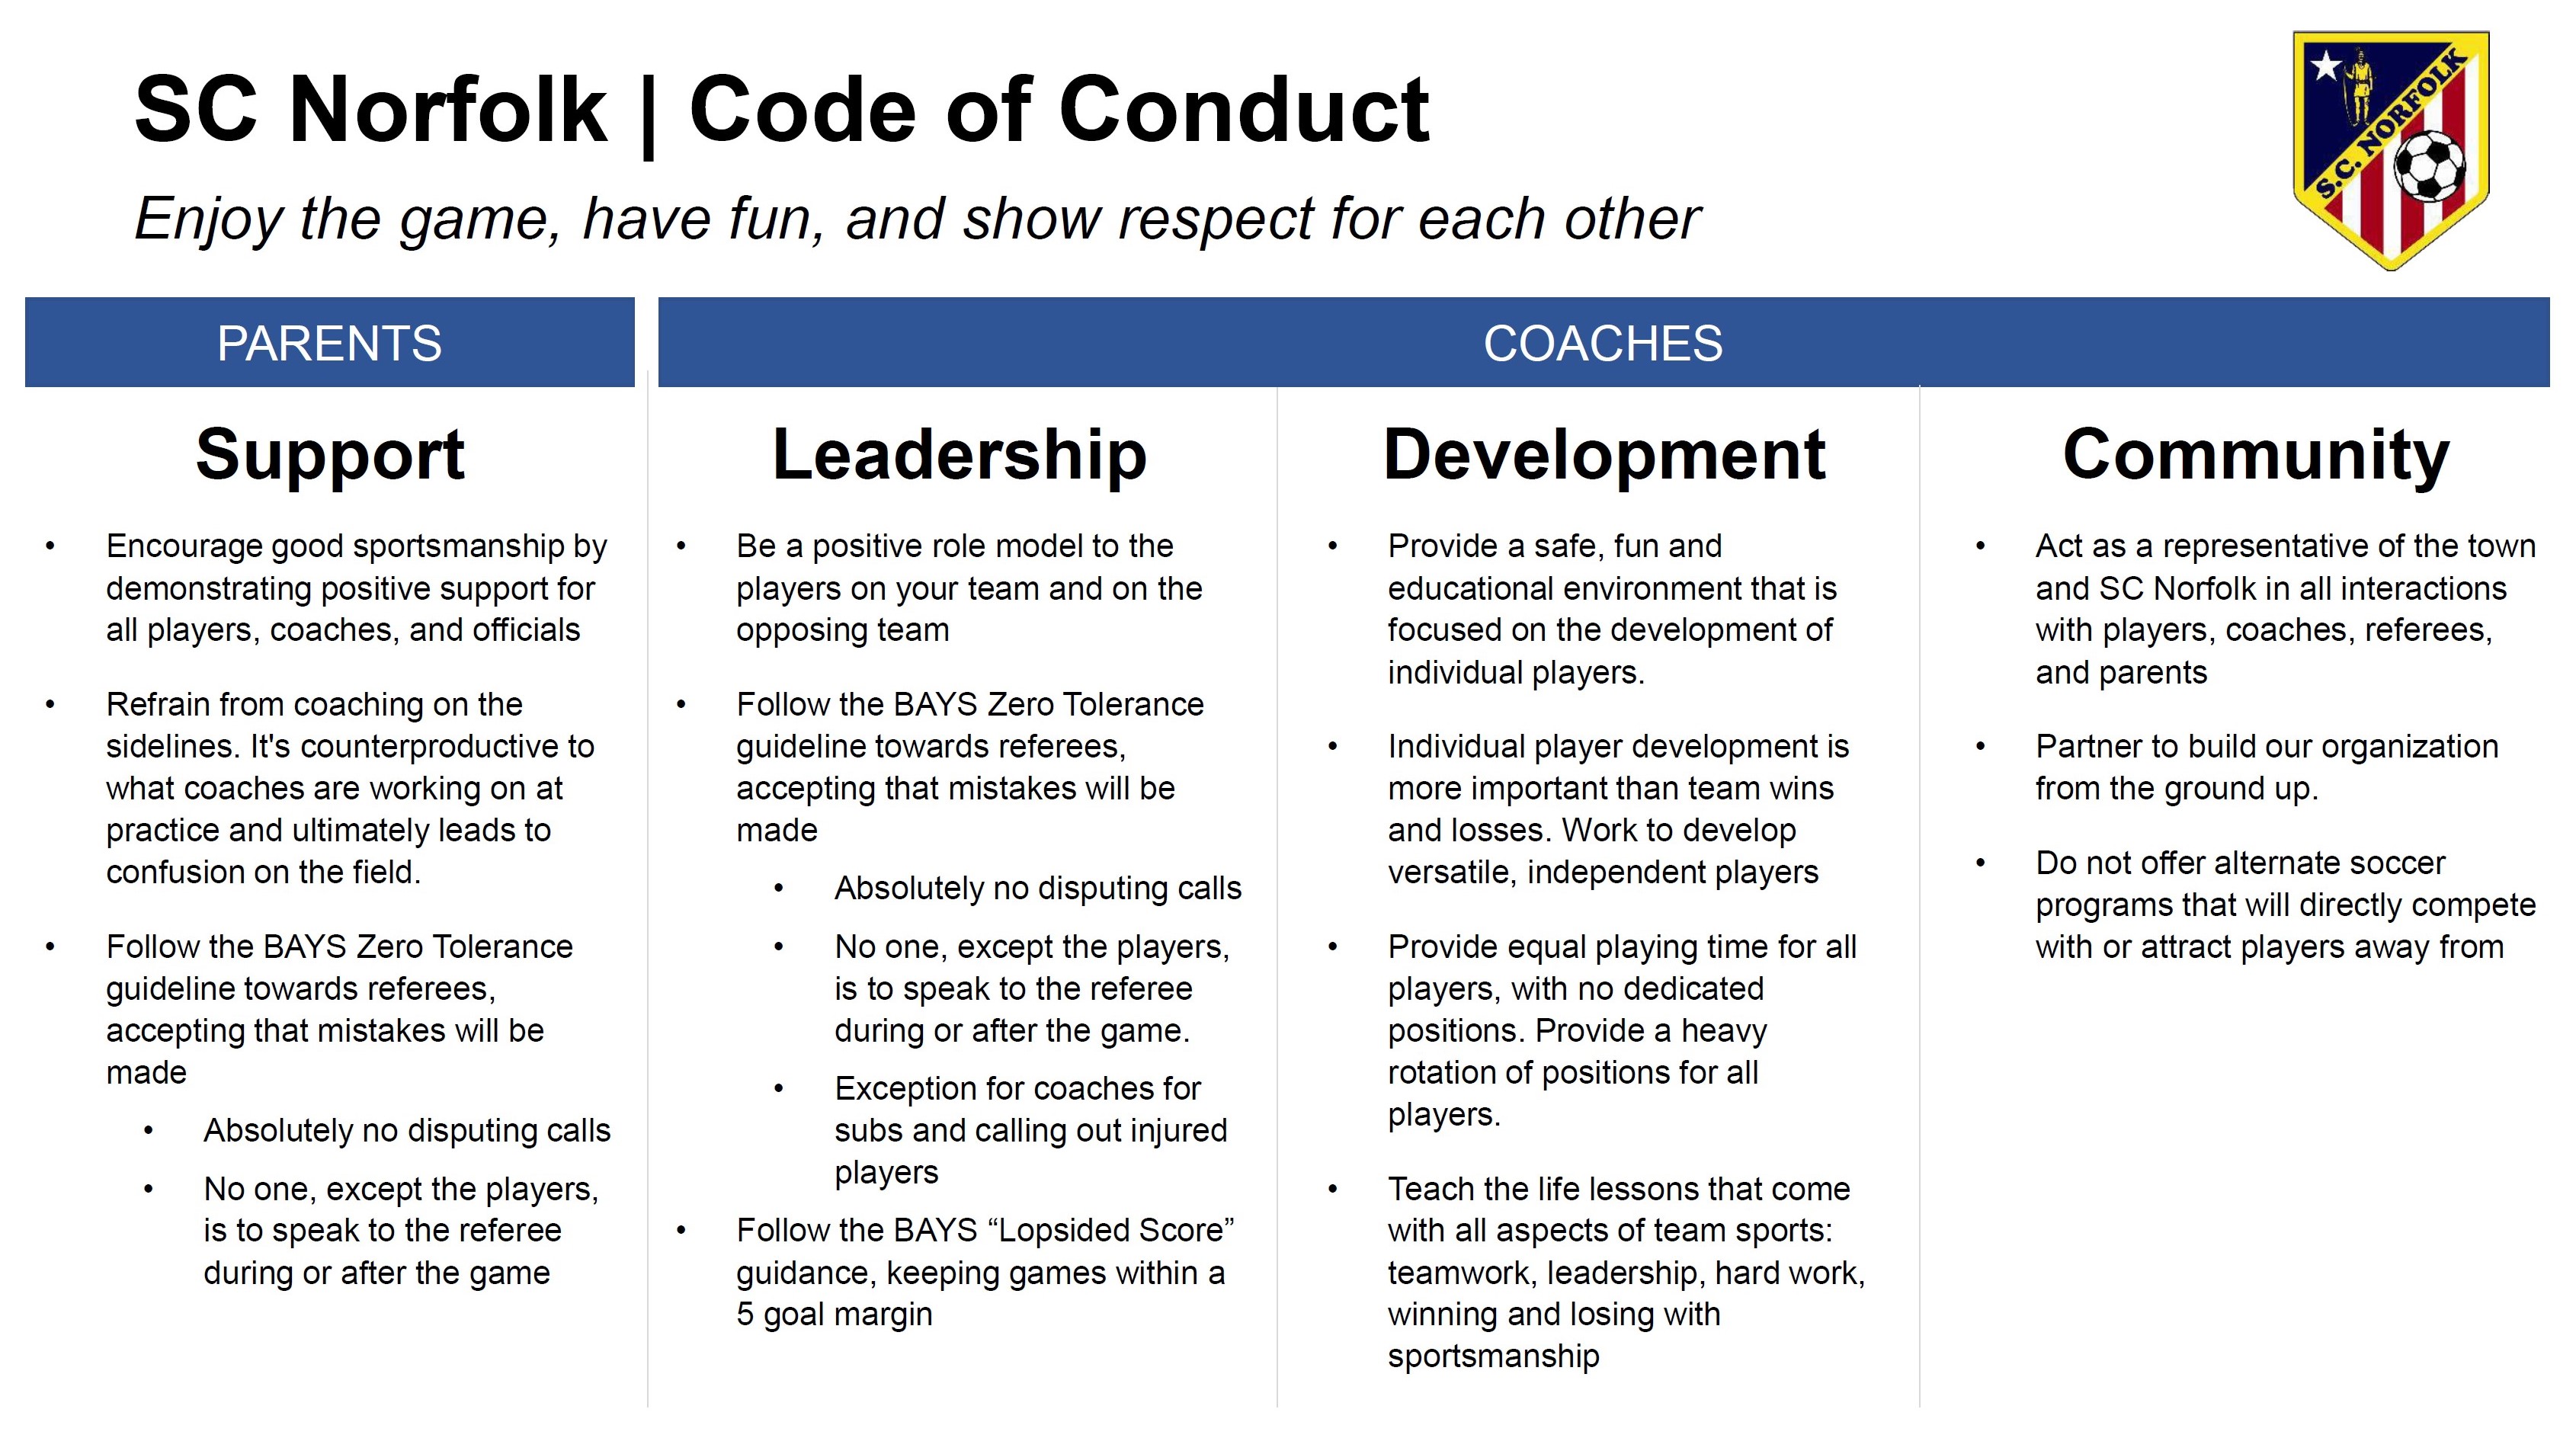 SC Norfolk Code of Conduct